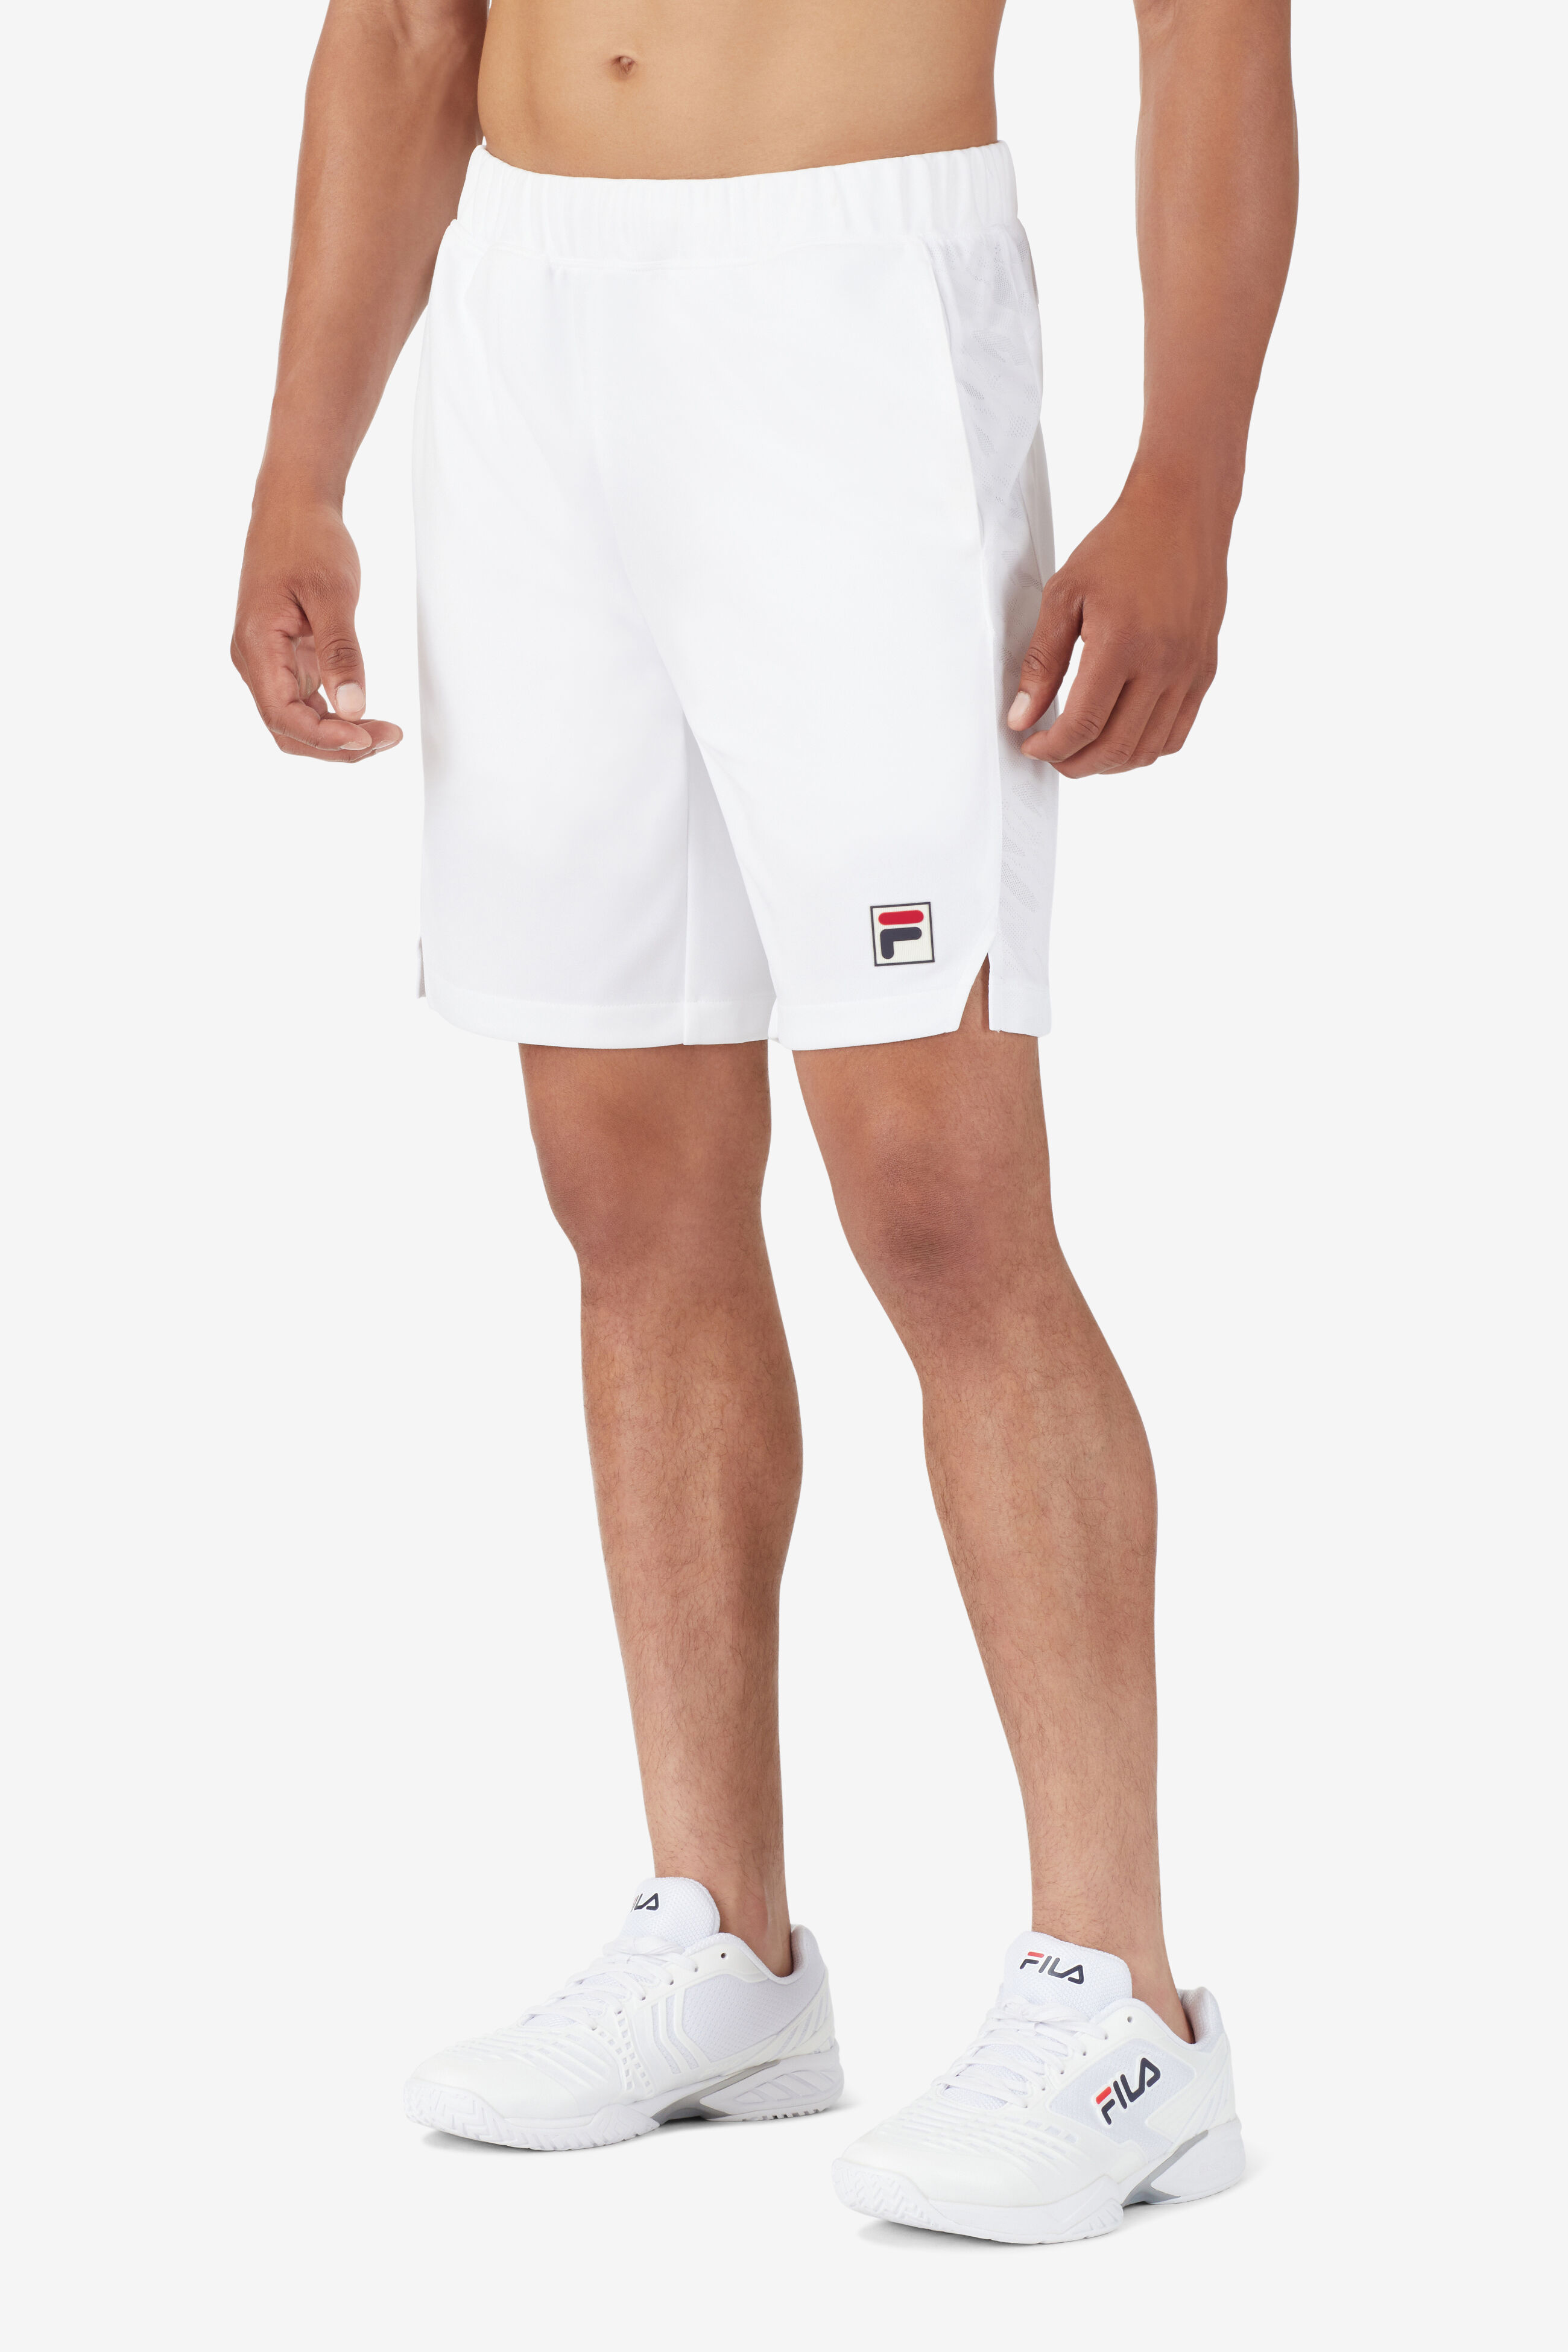 Mens Tennis Clothing  Outfits  adidas India